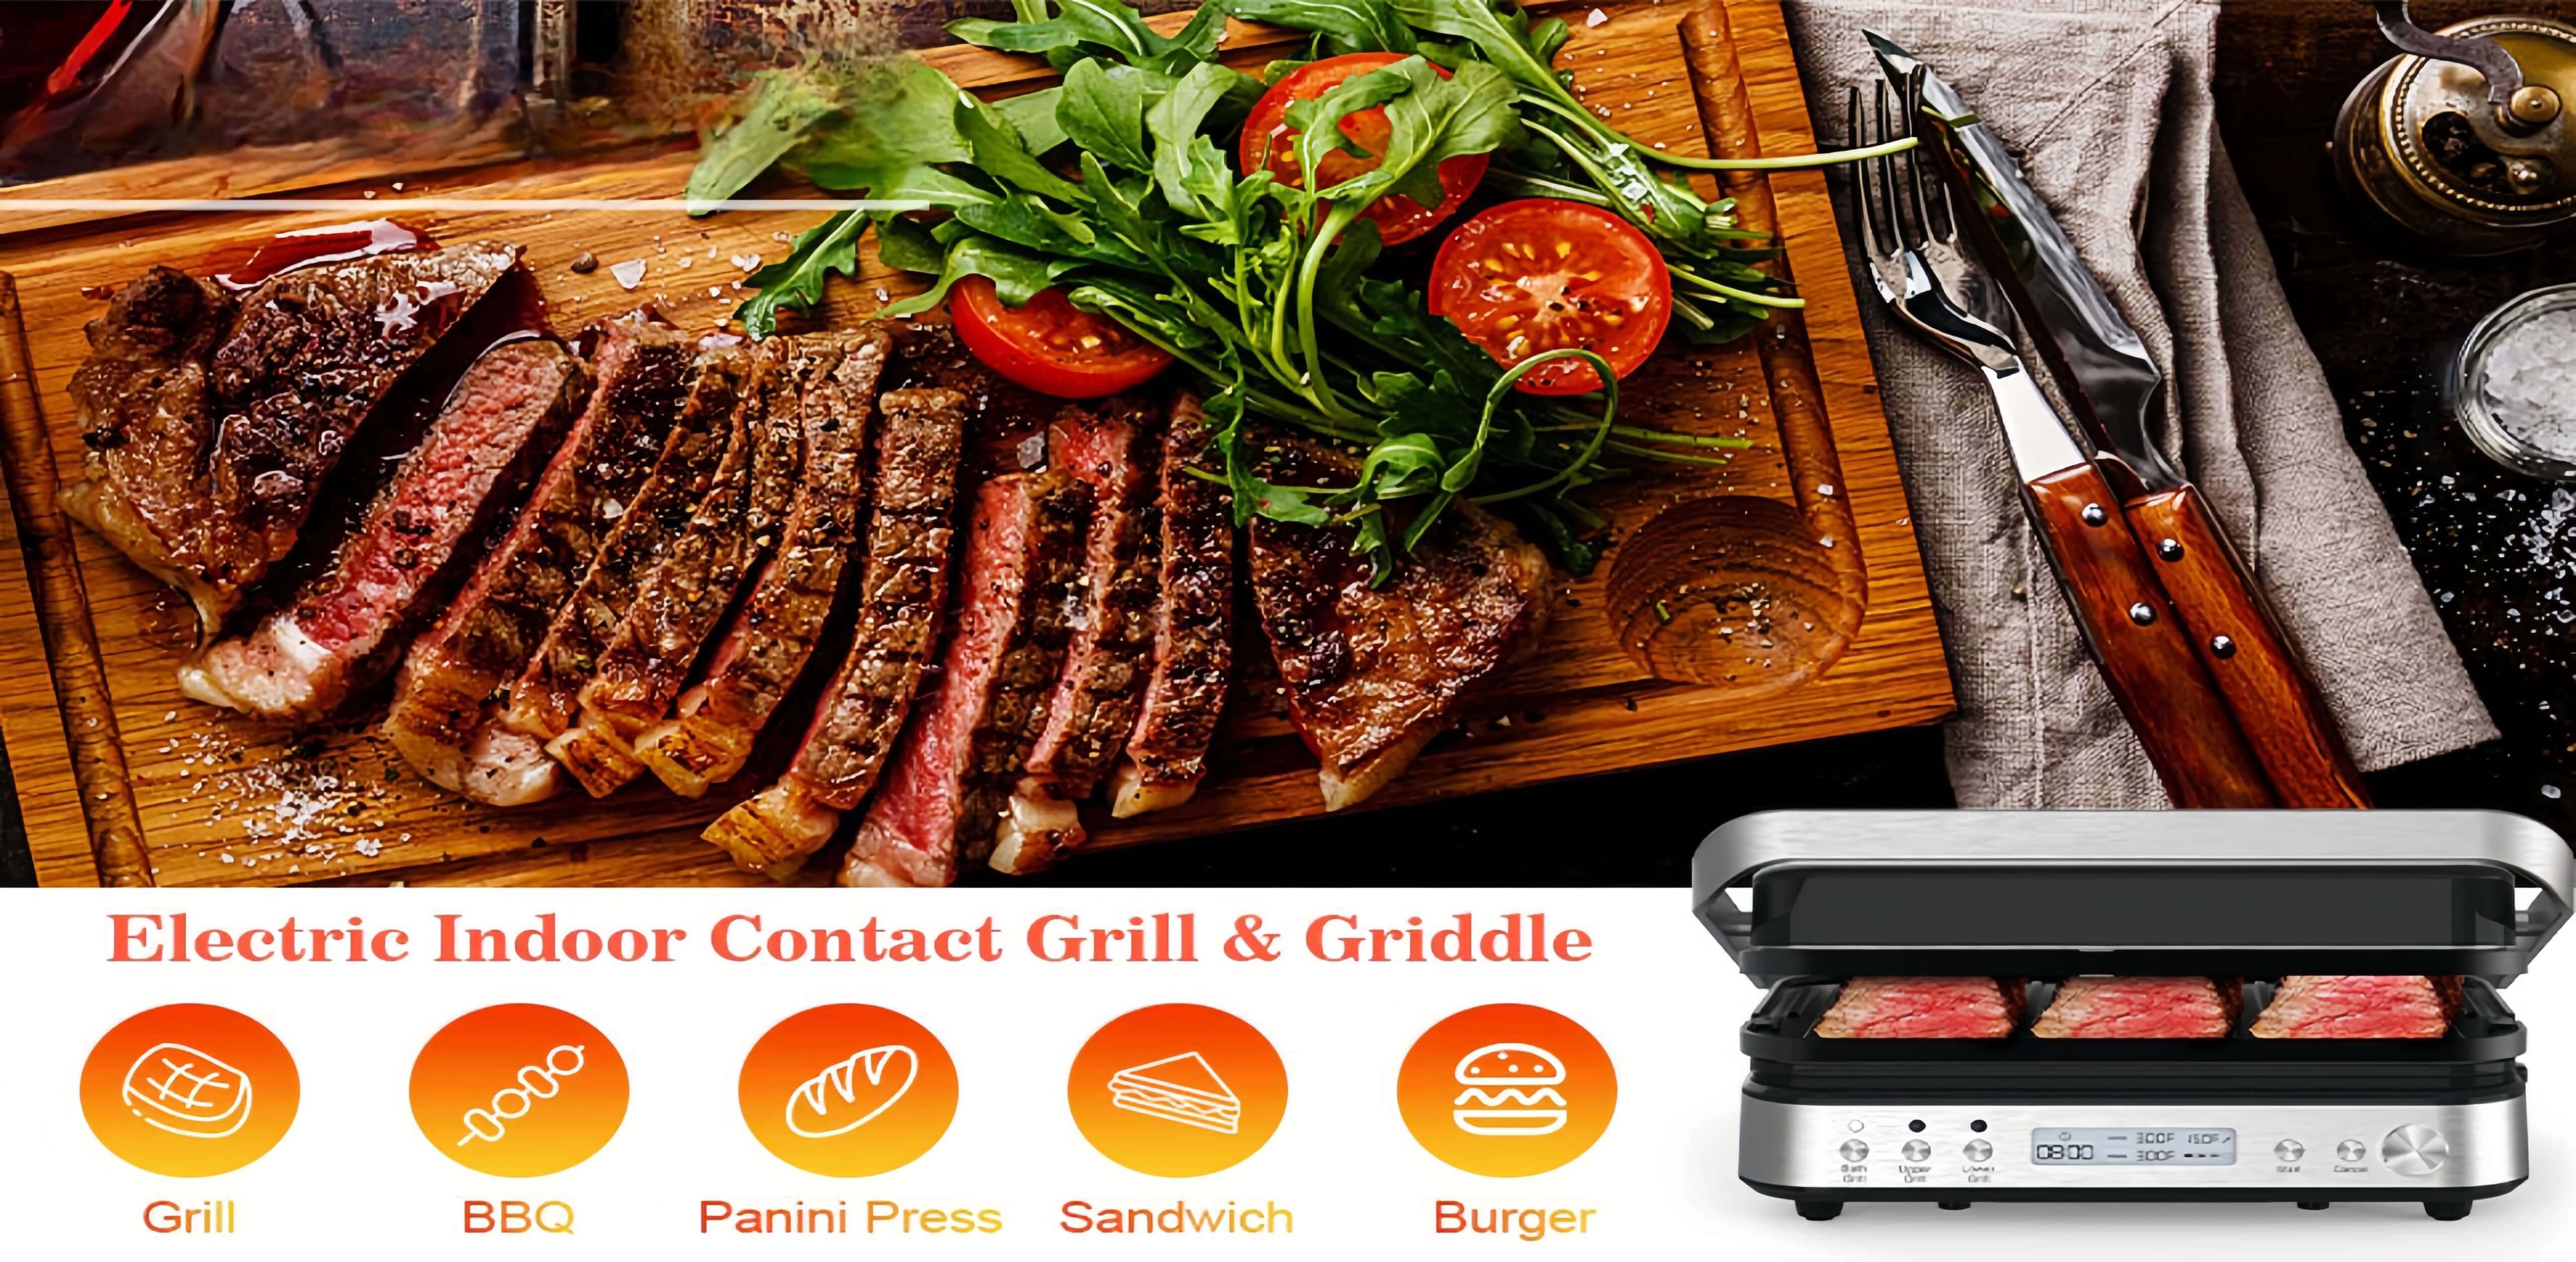  Electric grills